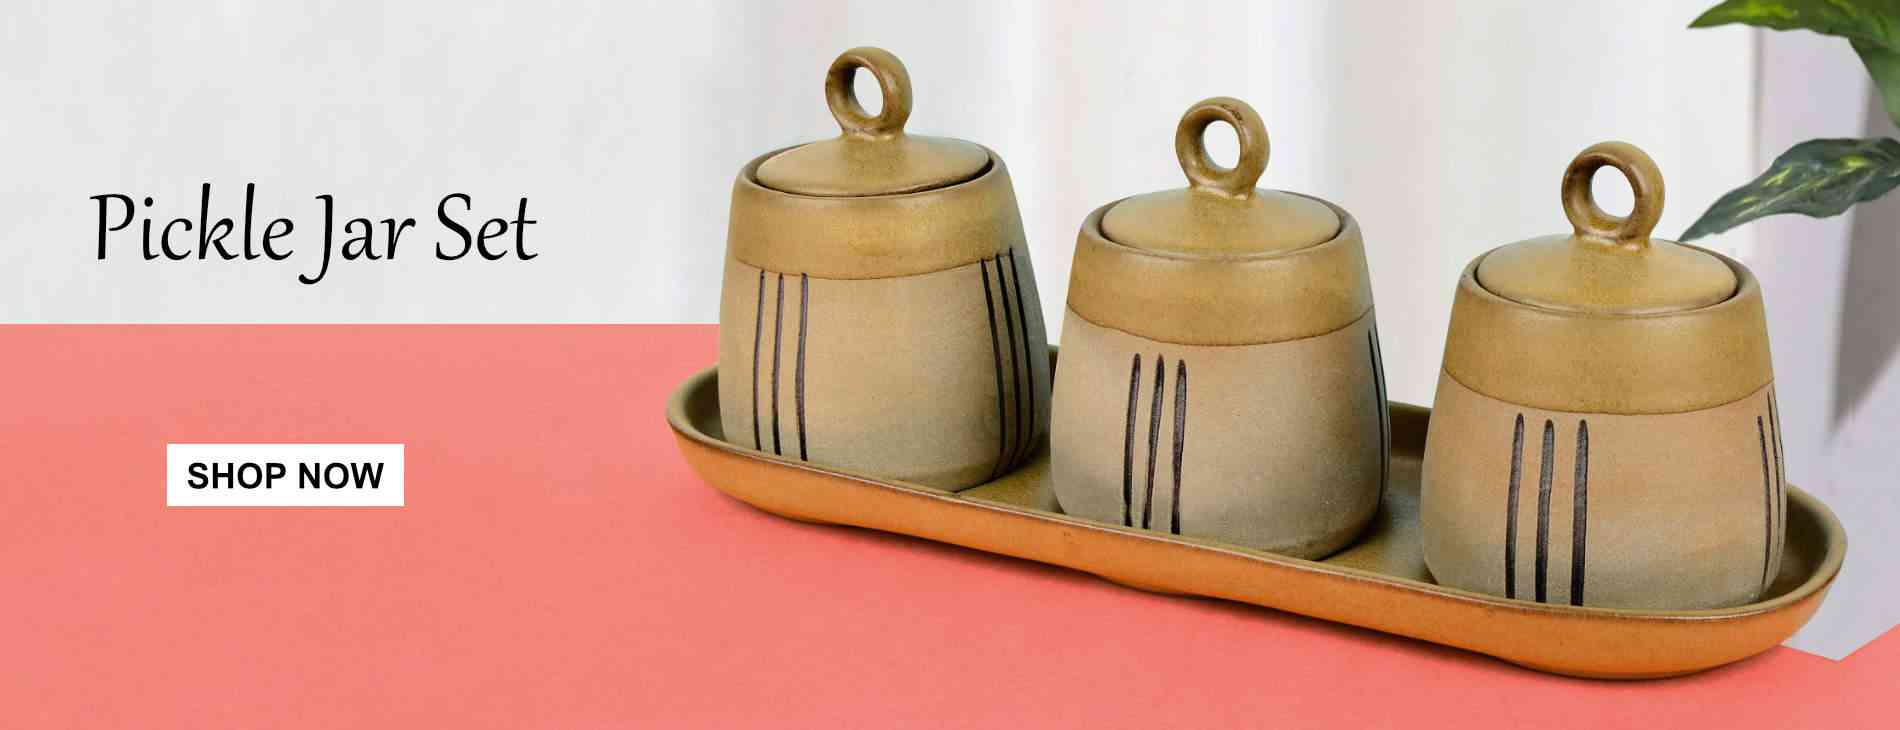 https://www.stylemyway.com/dining/kitchenware/pickle-jar-set